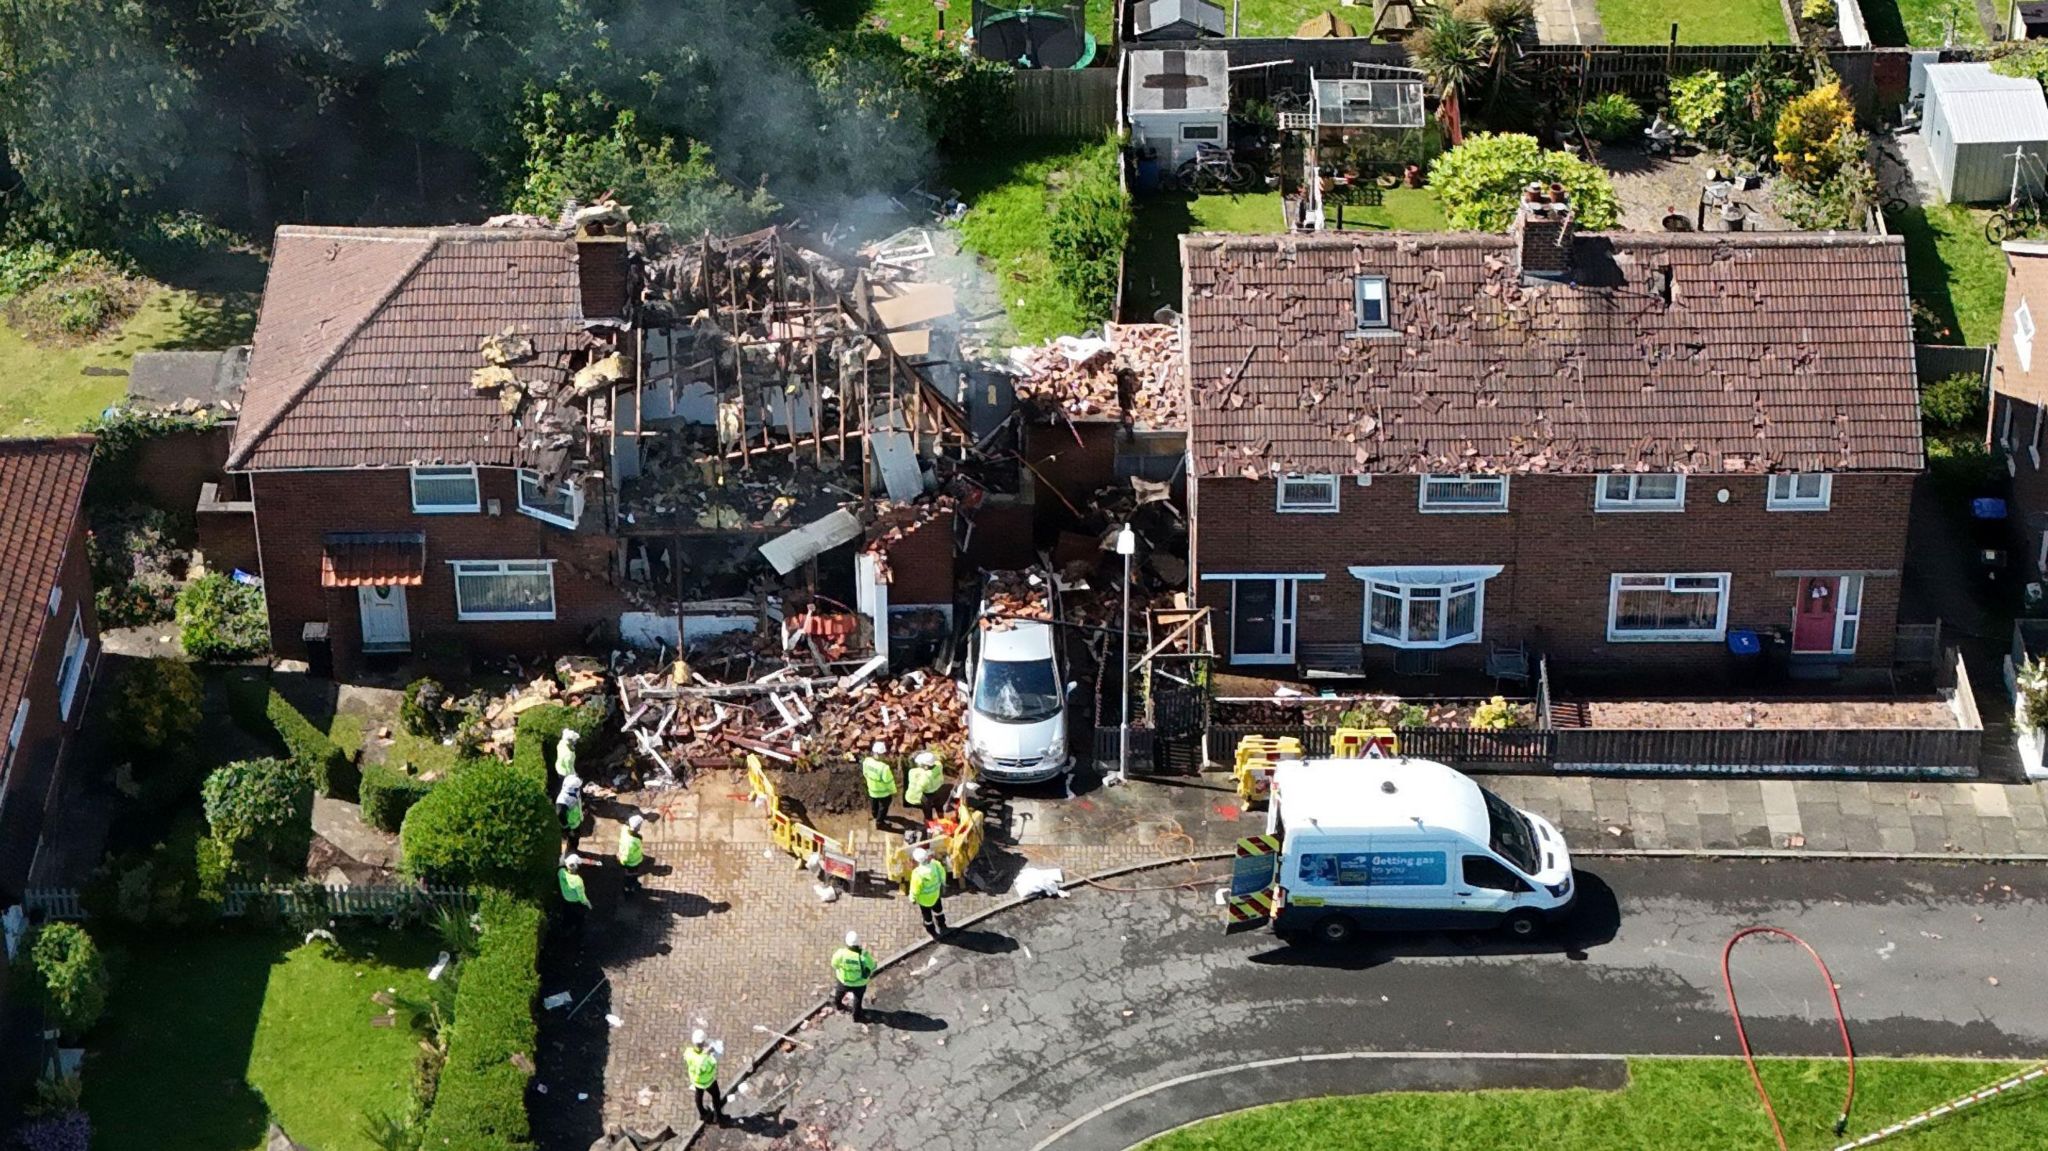 The scene of the explosion showing damage to a neighbouring property and gas engineers at work